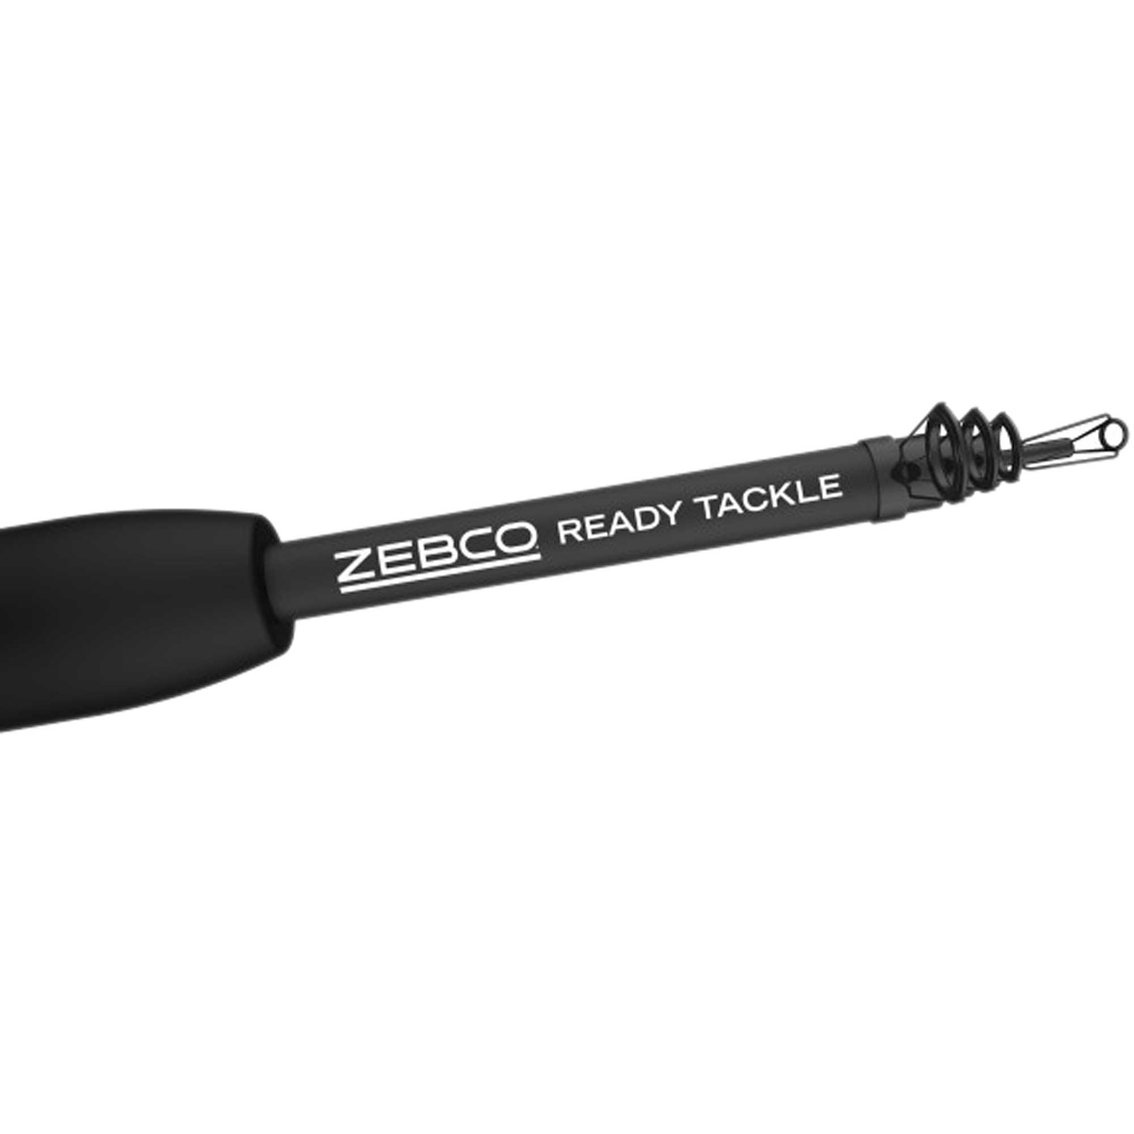 Zebco Ready Tackle Telescopic Fishing Rod, Reel and Tackle Wallet 3 pc. Set - Image 4 of 6